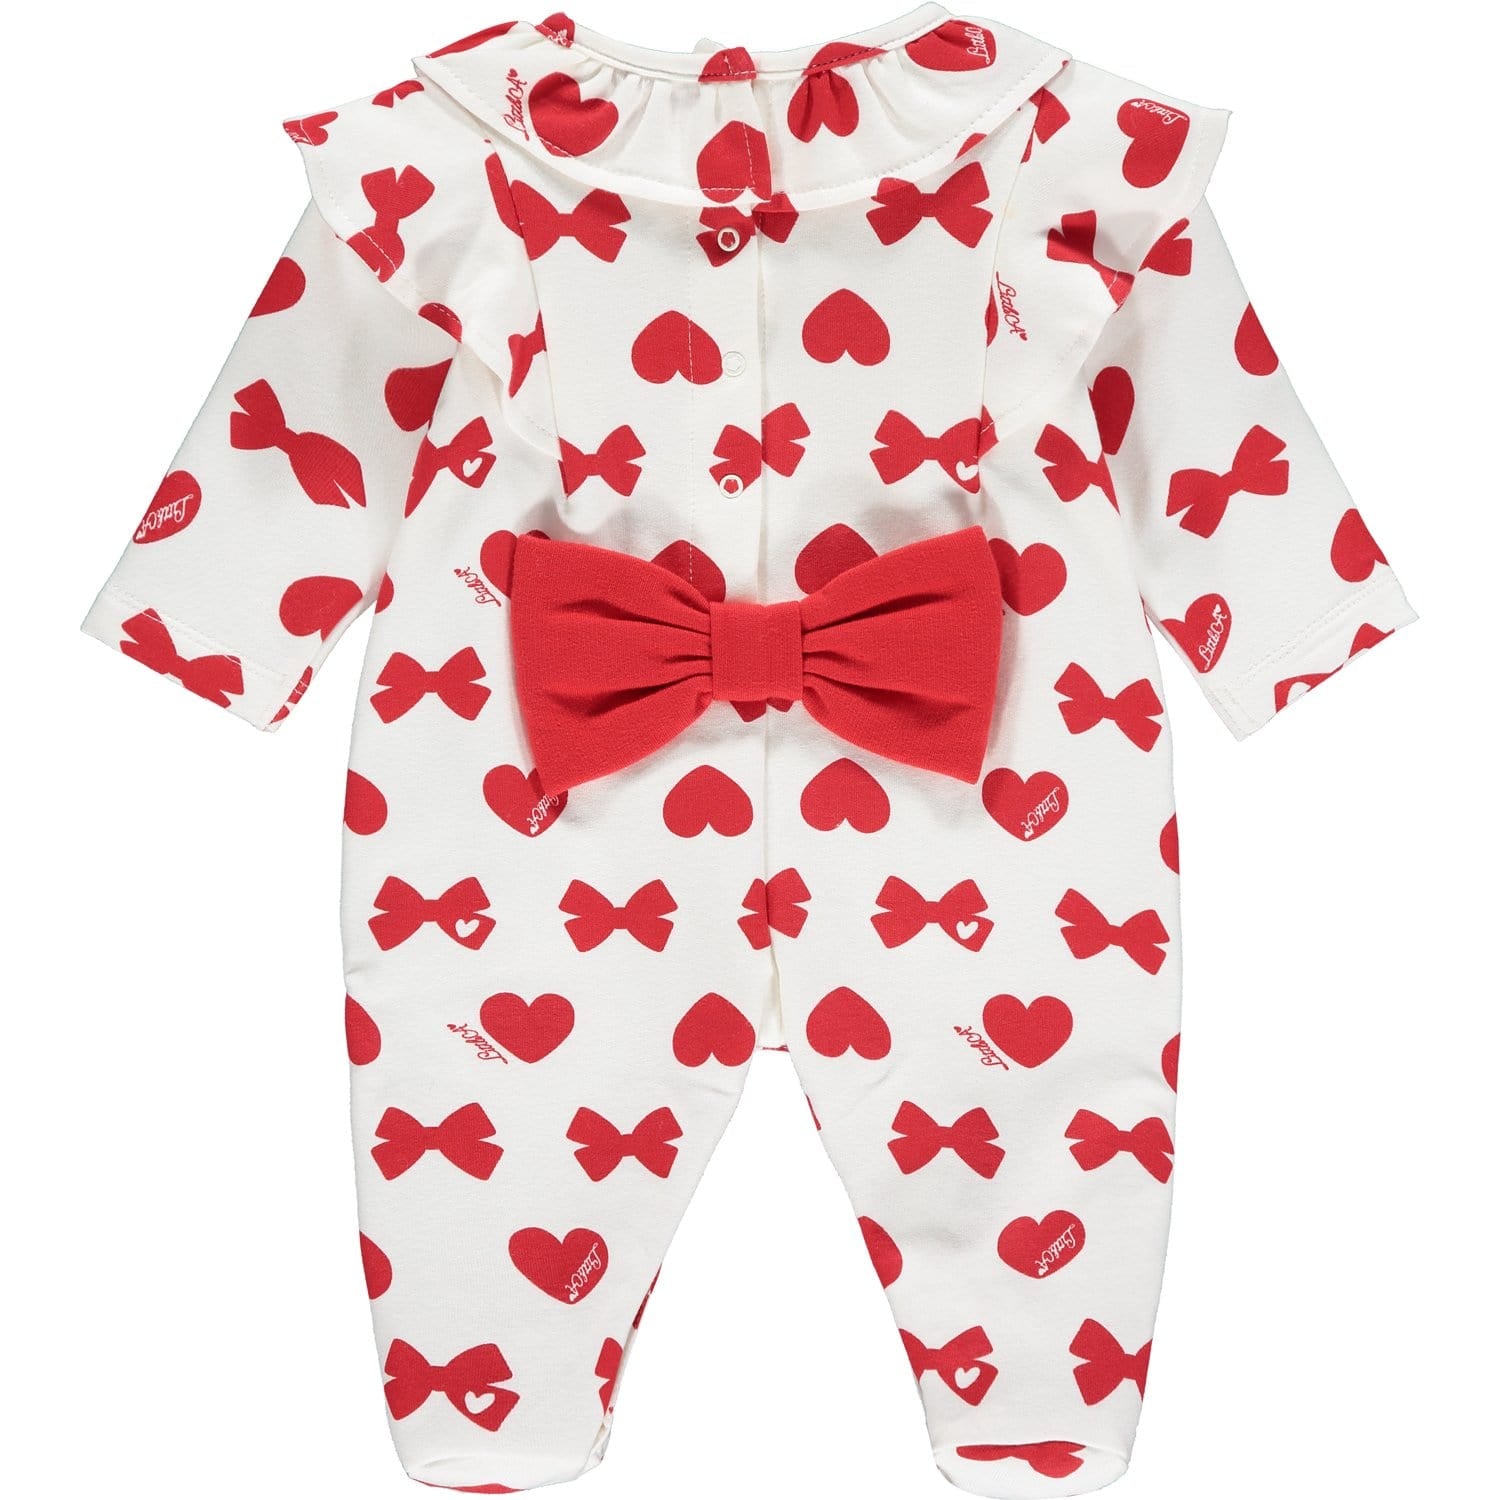 LITTLE A - Bows & Hearts Print Babygrow - Red